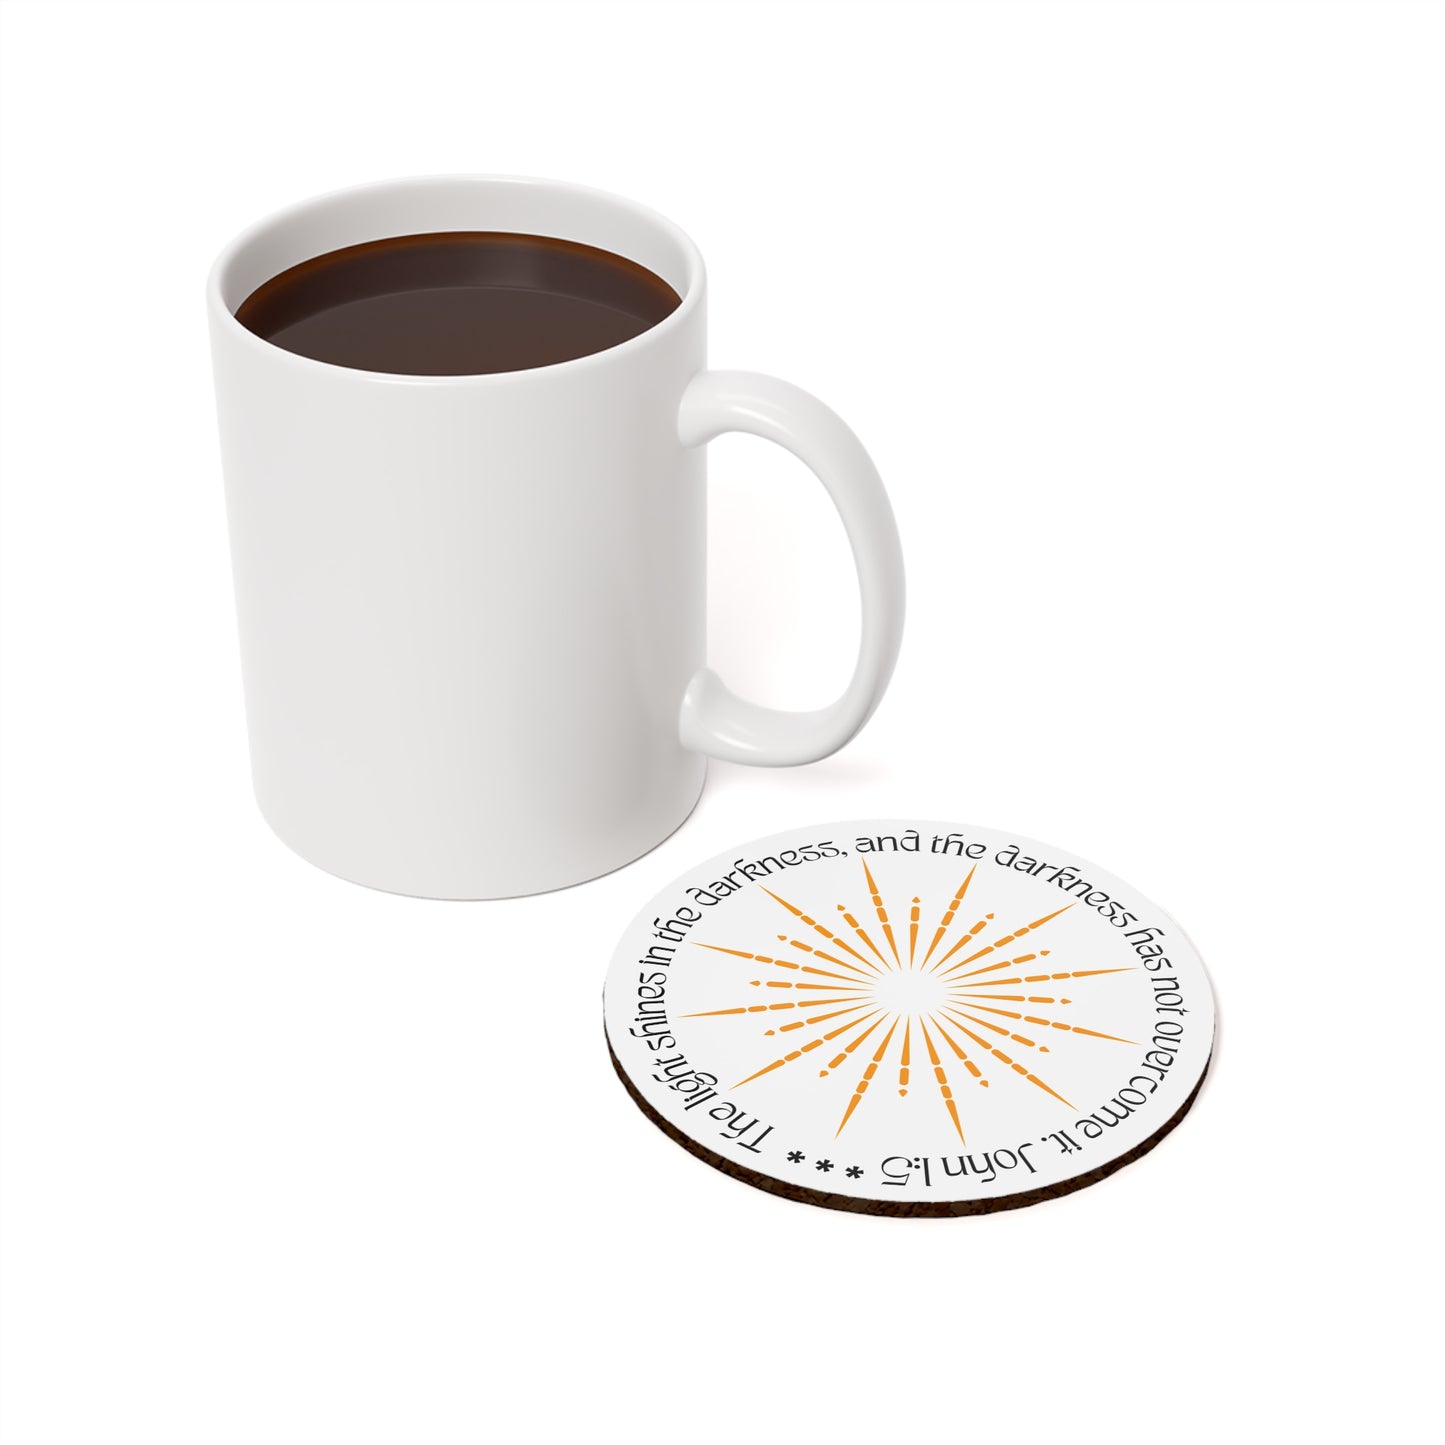 Coaster for Candles, Mugs, Glasses, The Light Shines In the Darkness